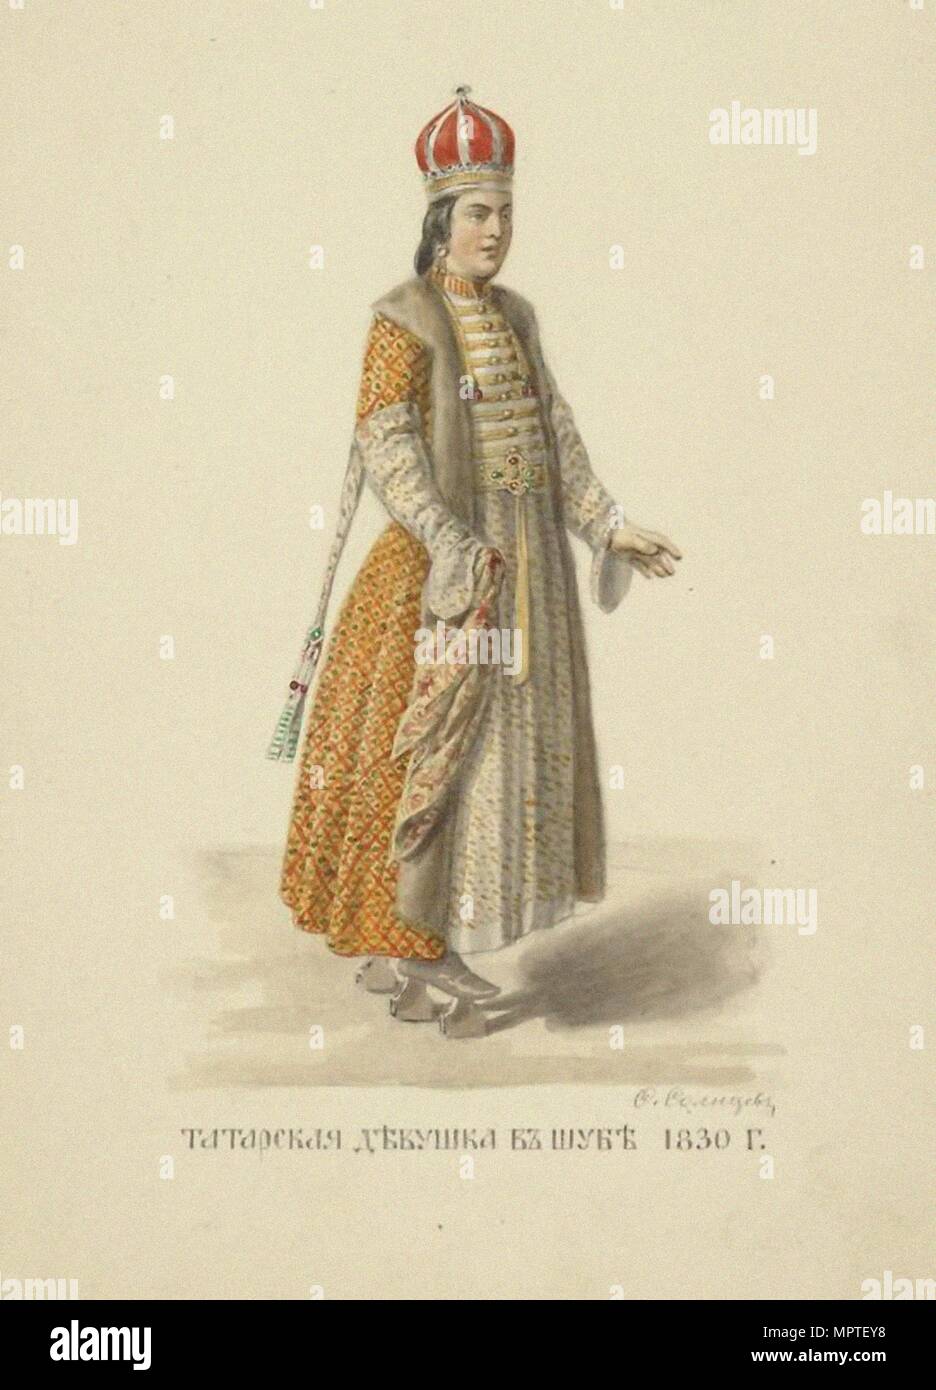 Kazan Tatar Girl in Fur Coat of 1830 (From the series Clothing of the Russian state), 1869. Stock Photo